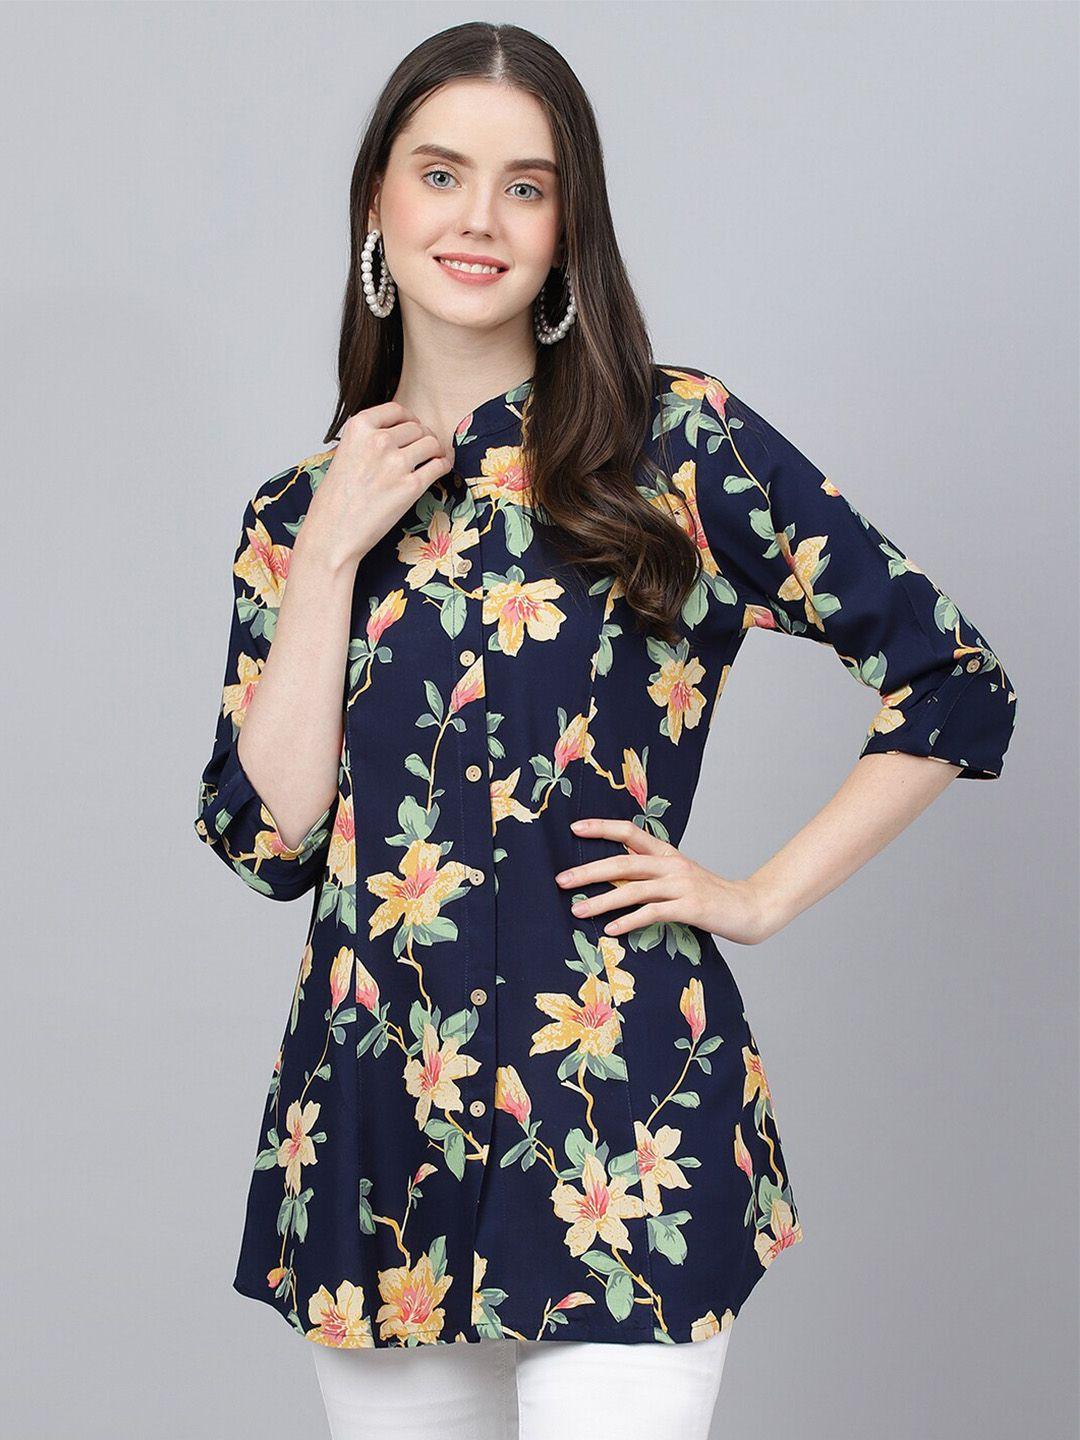 kalini floral printed roll-up sleeves shirt style longline top